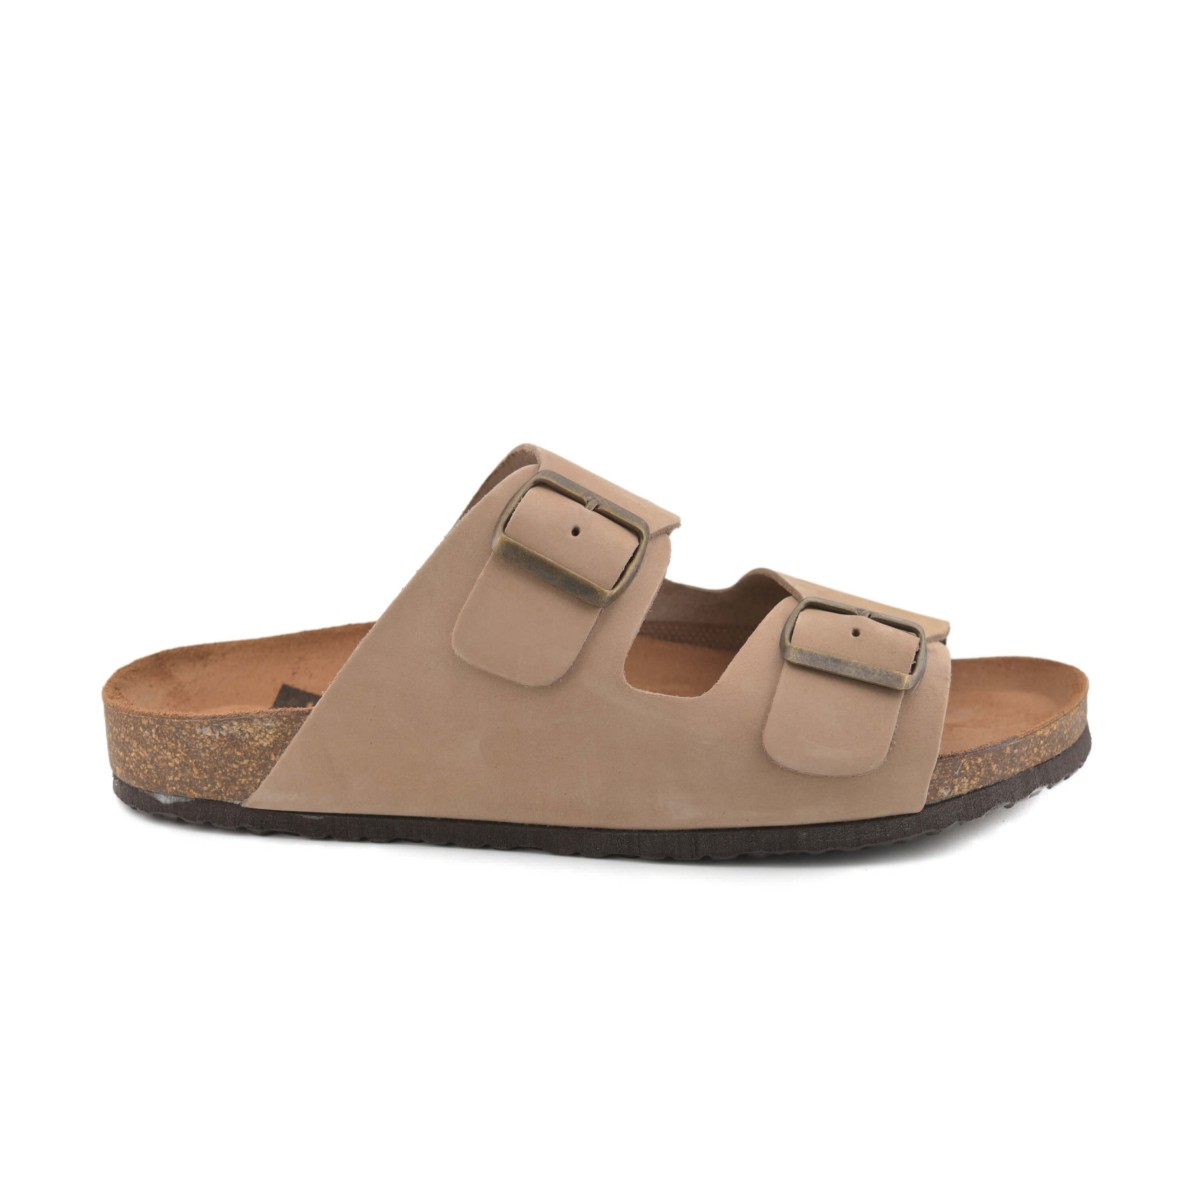 Men's taupe leather Bio sandals by Casual